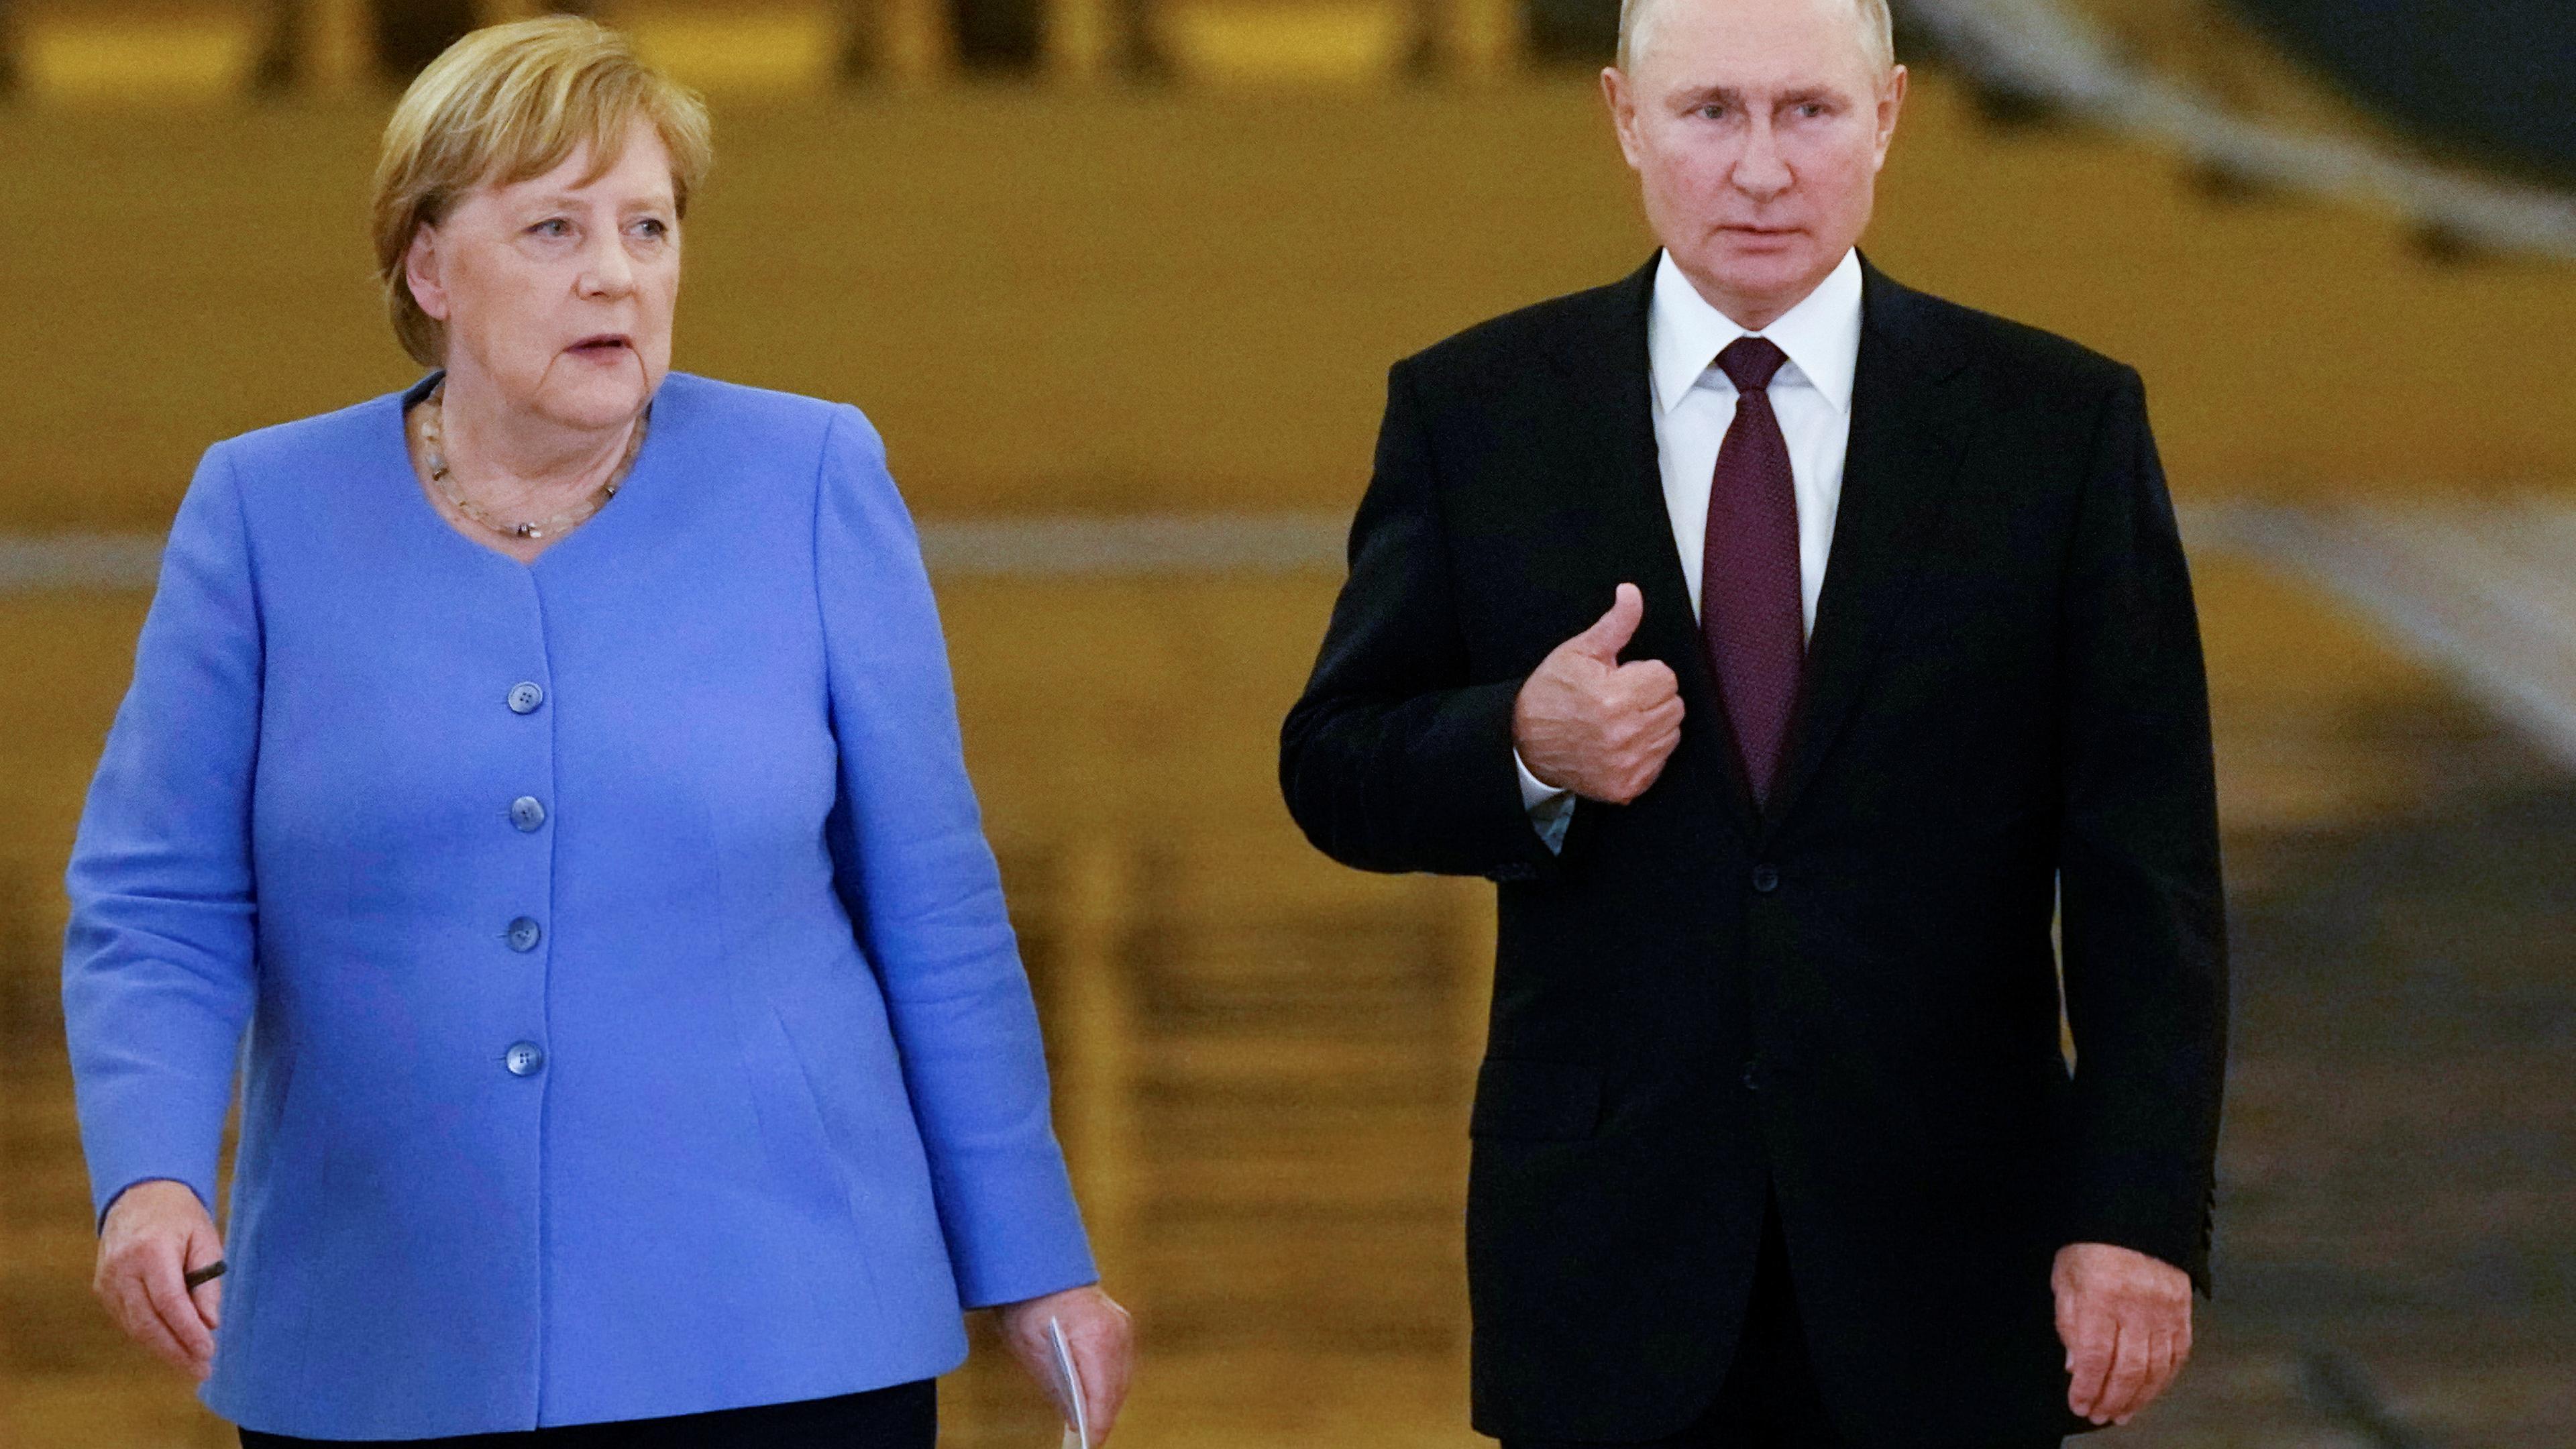 Russian President Vladimir Putin and German Chancellor Angela Merkel enter a hall during a news conference following their talks at the Kremlin in Moscow, Russia